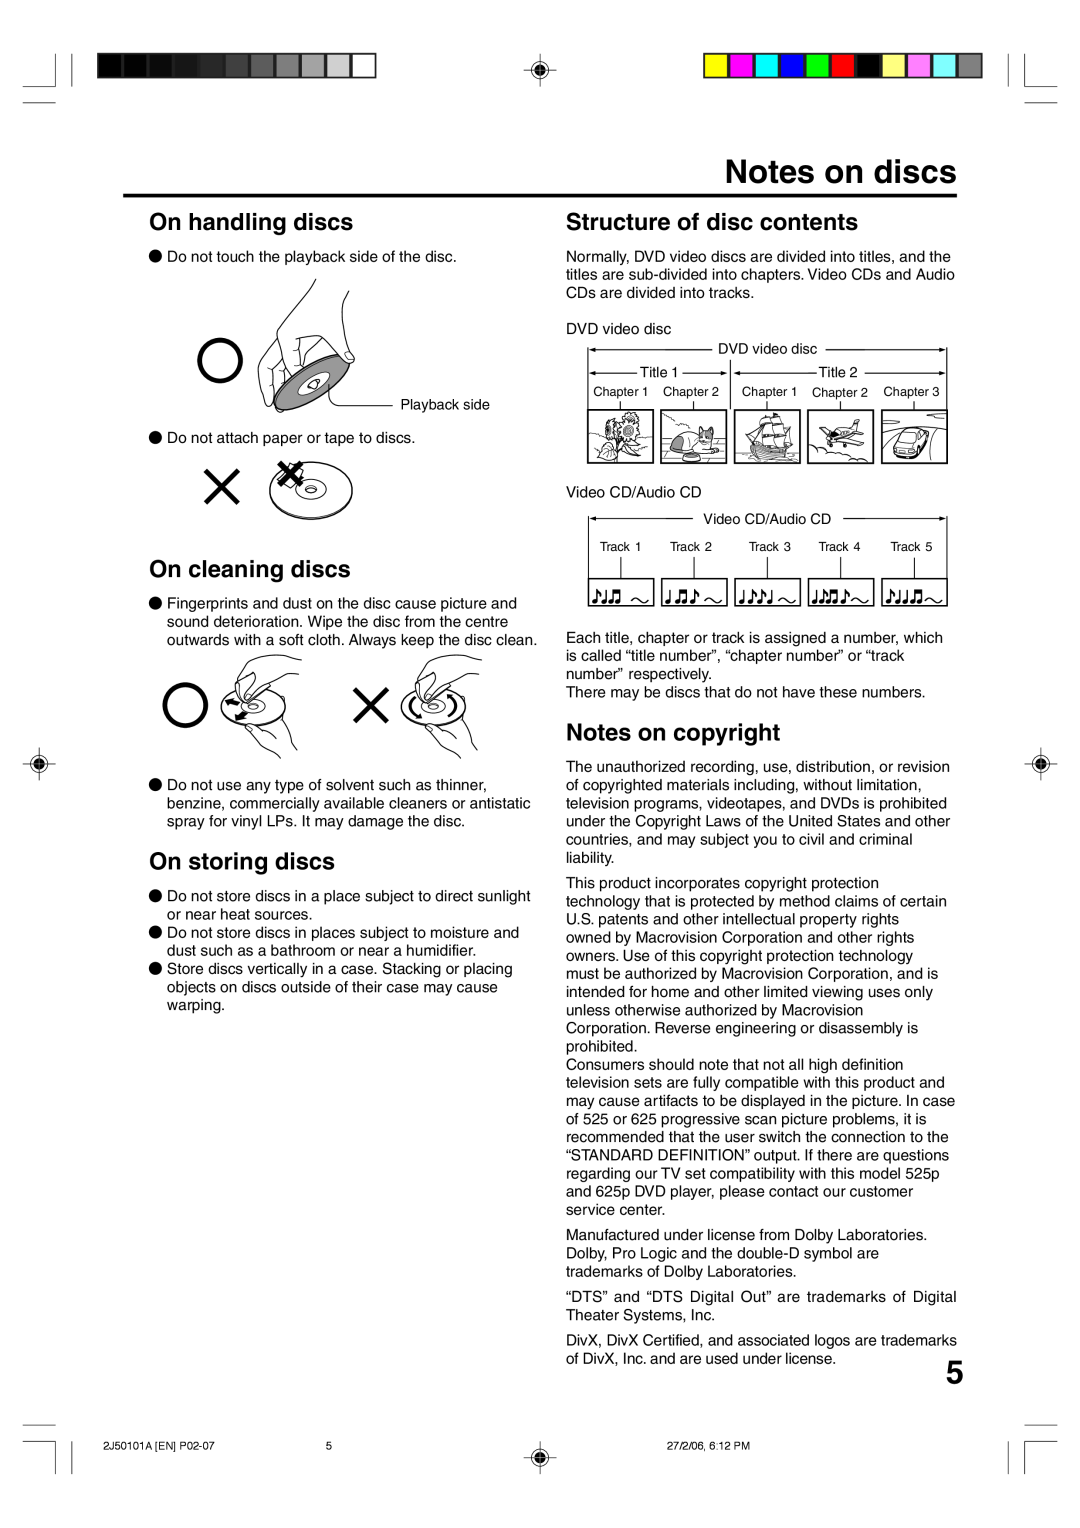 Toshiba SD-37VBSB manual Notes on discs, On handling discs, On cleaning discs, On storing discs, Structure of disc contents 